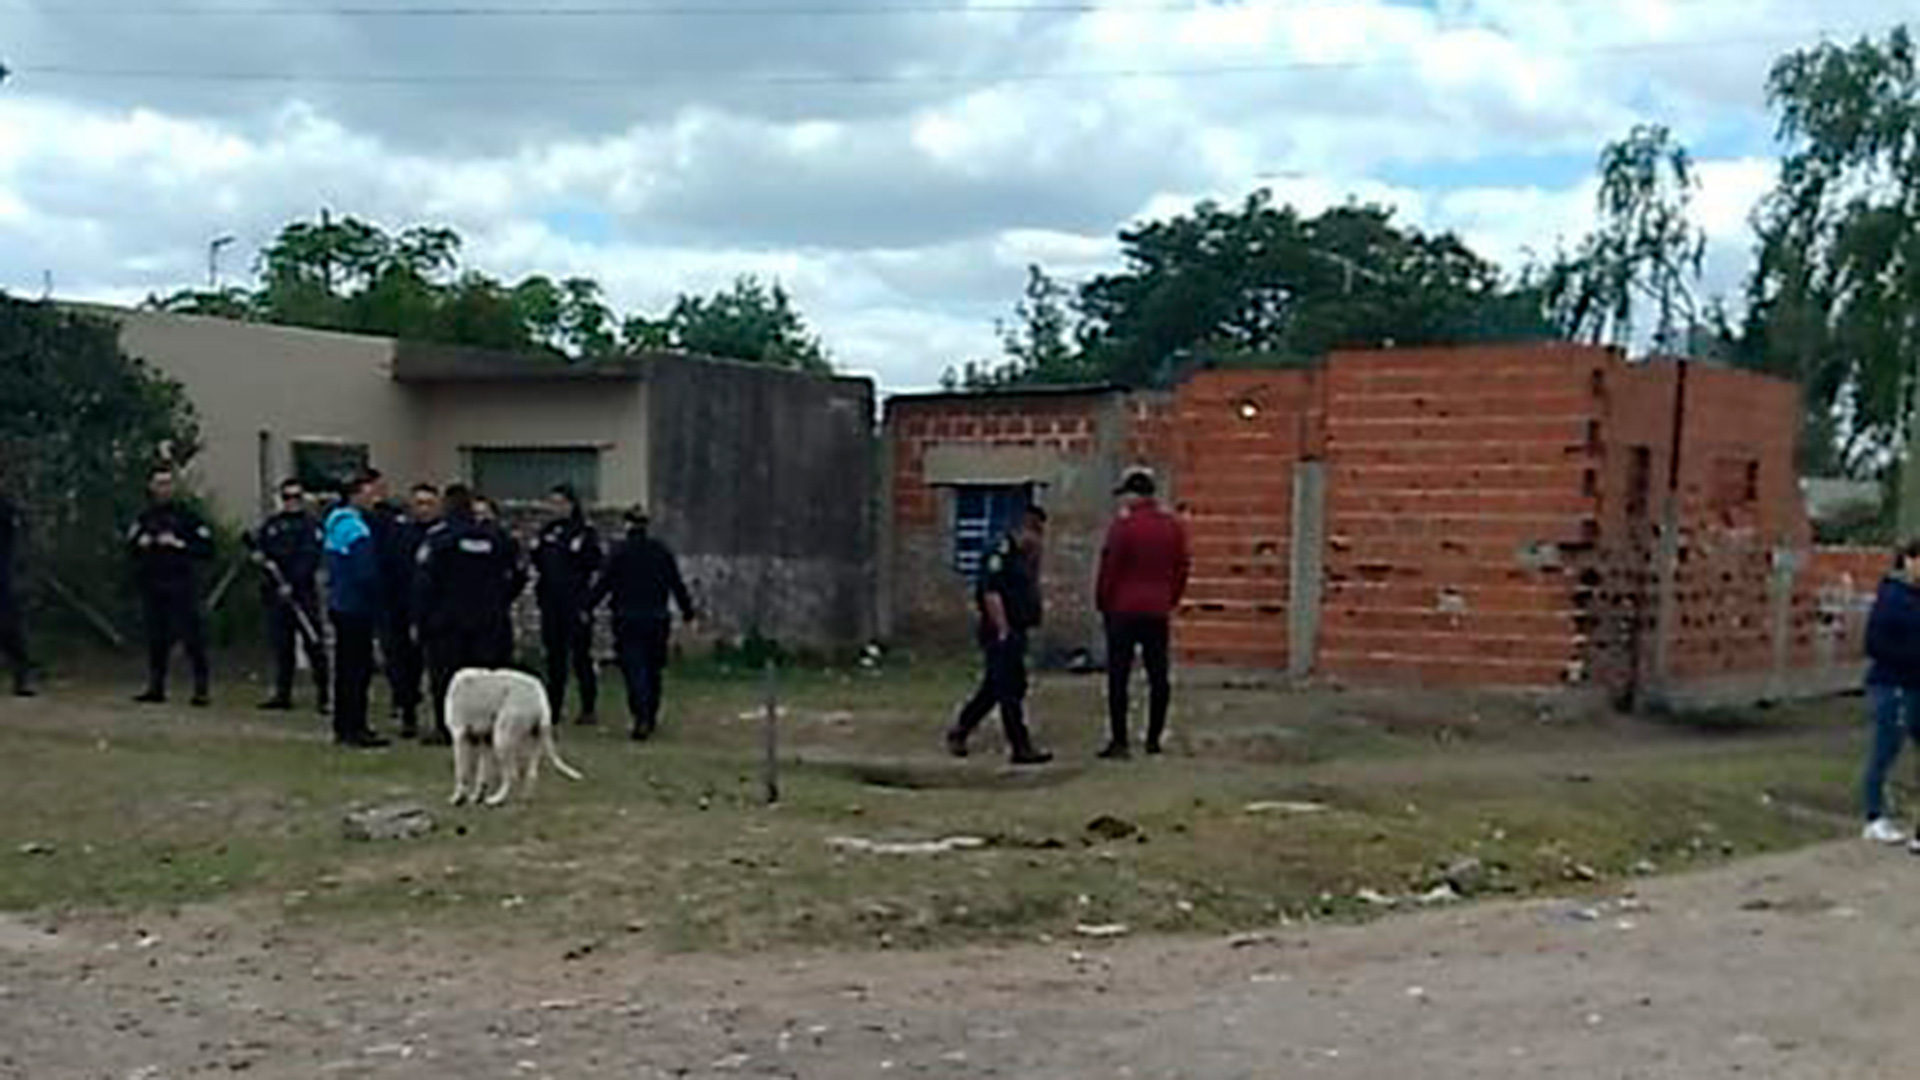 The victim's body was transferred to the Judicial Morgue of Lomas de Zamora, where the autopsy will be carried out.